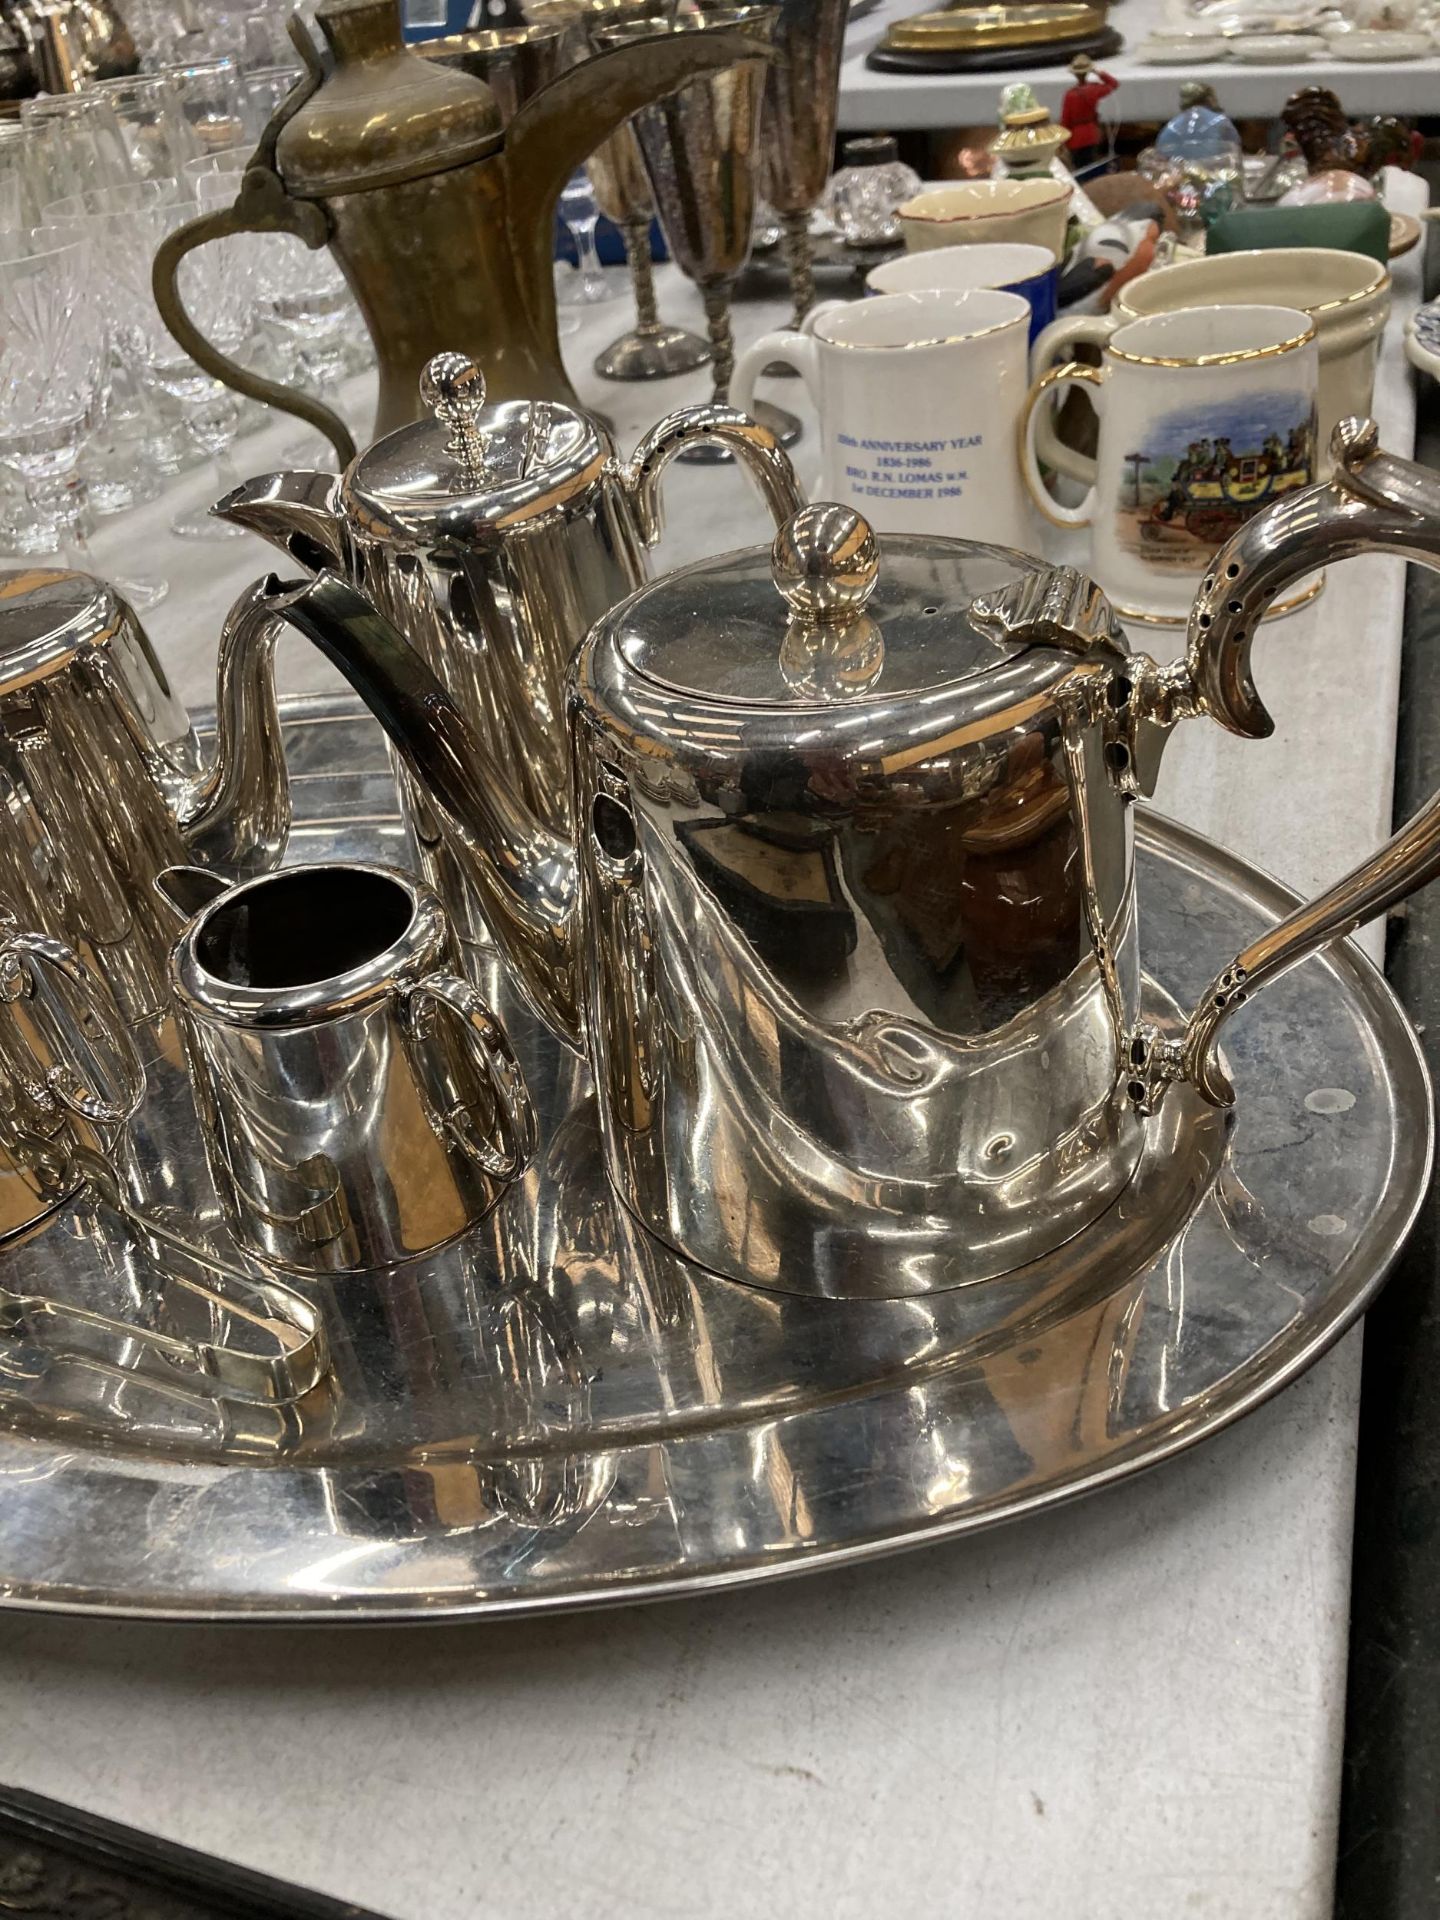 A VINTAGE SILVER PLATED TEA SET AND TRAY - Image 3 of 4